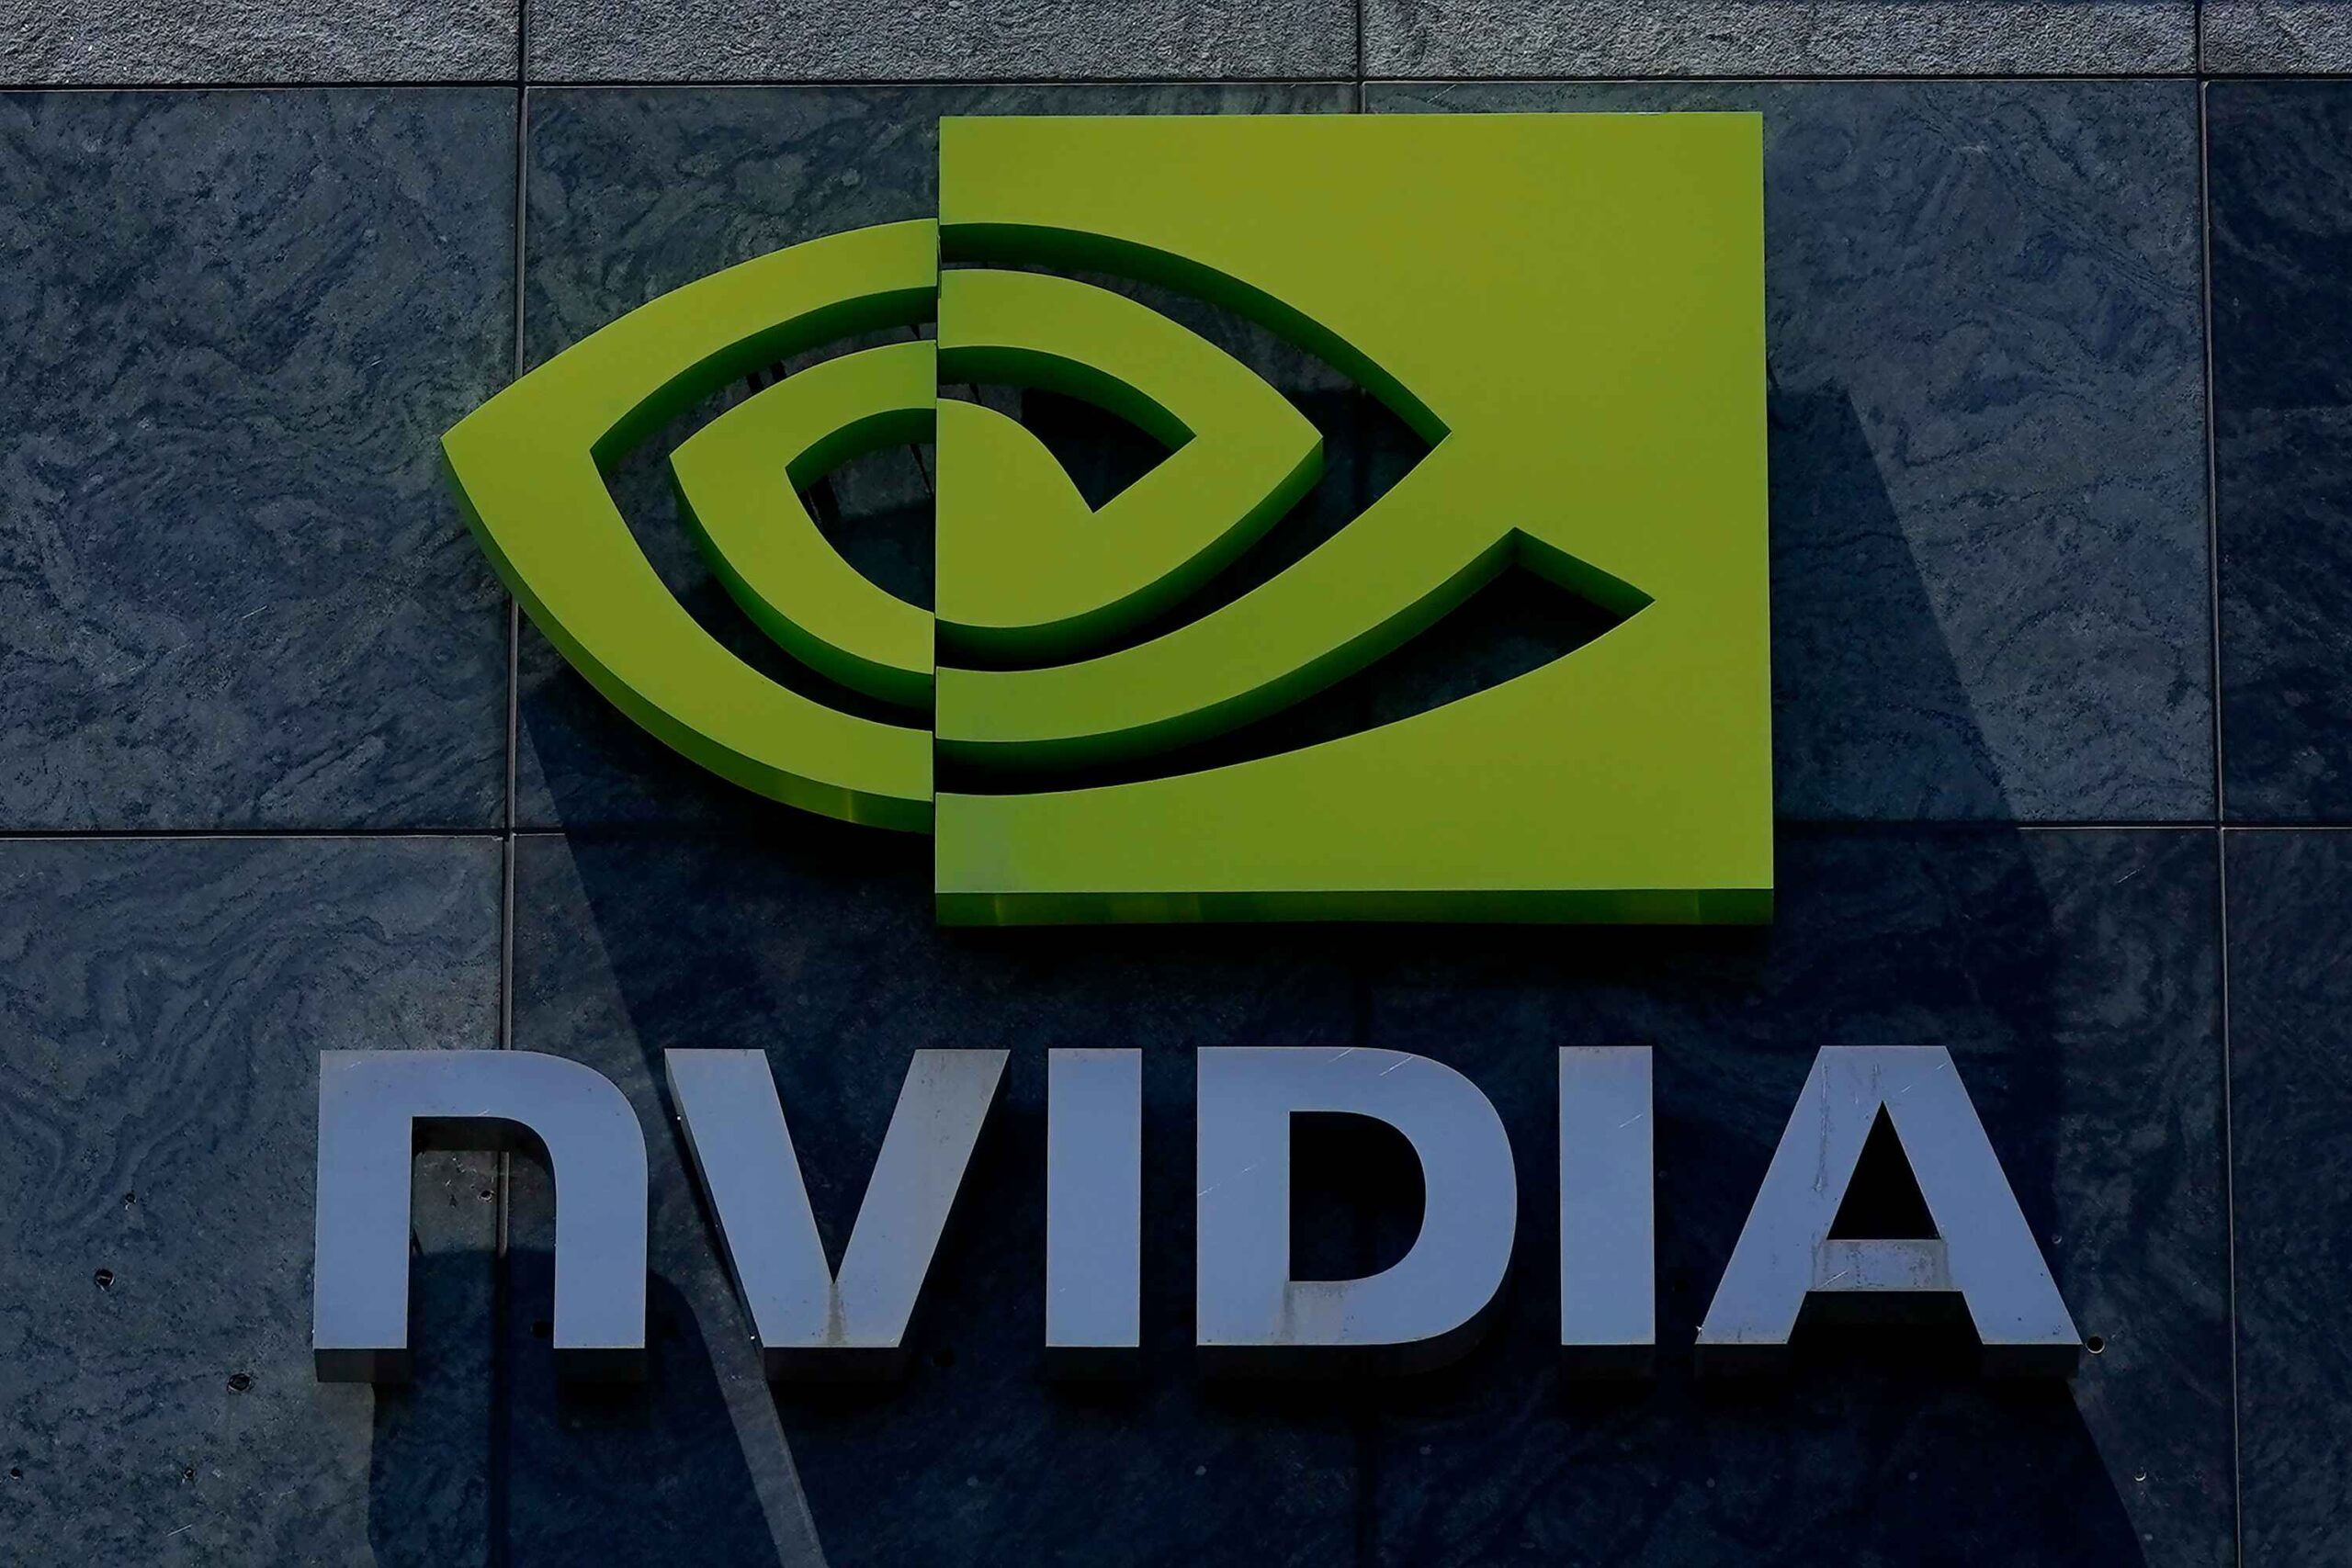 Former Speaker Nancy Pelosi and her husband Paul Pelosi made a multi-million-dollar investment in Nvidia despite calls to ban members of Congress from trading. (AP Photo/Jeff Chiu)